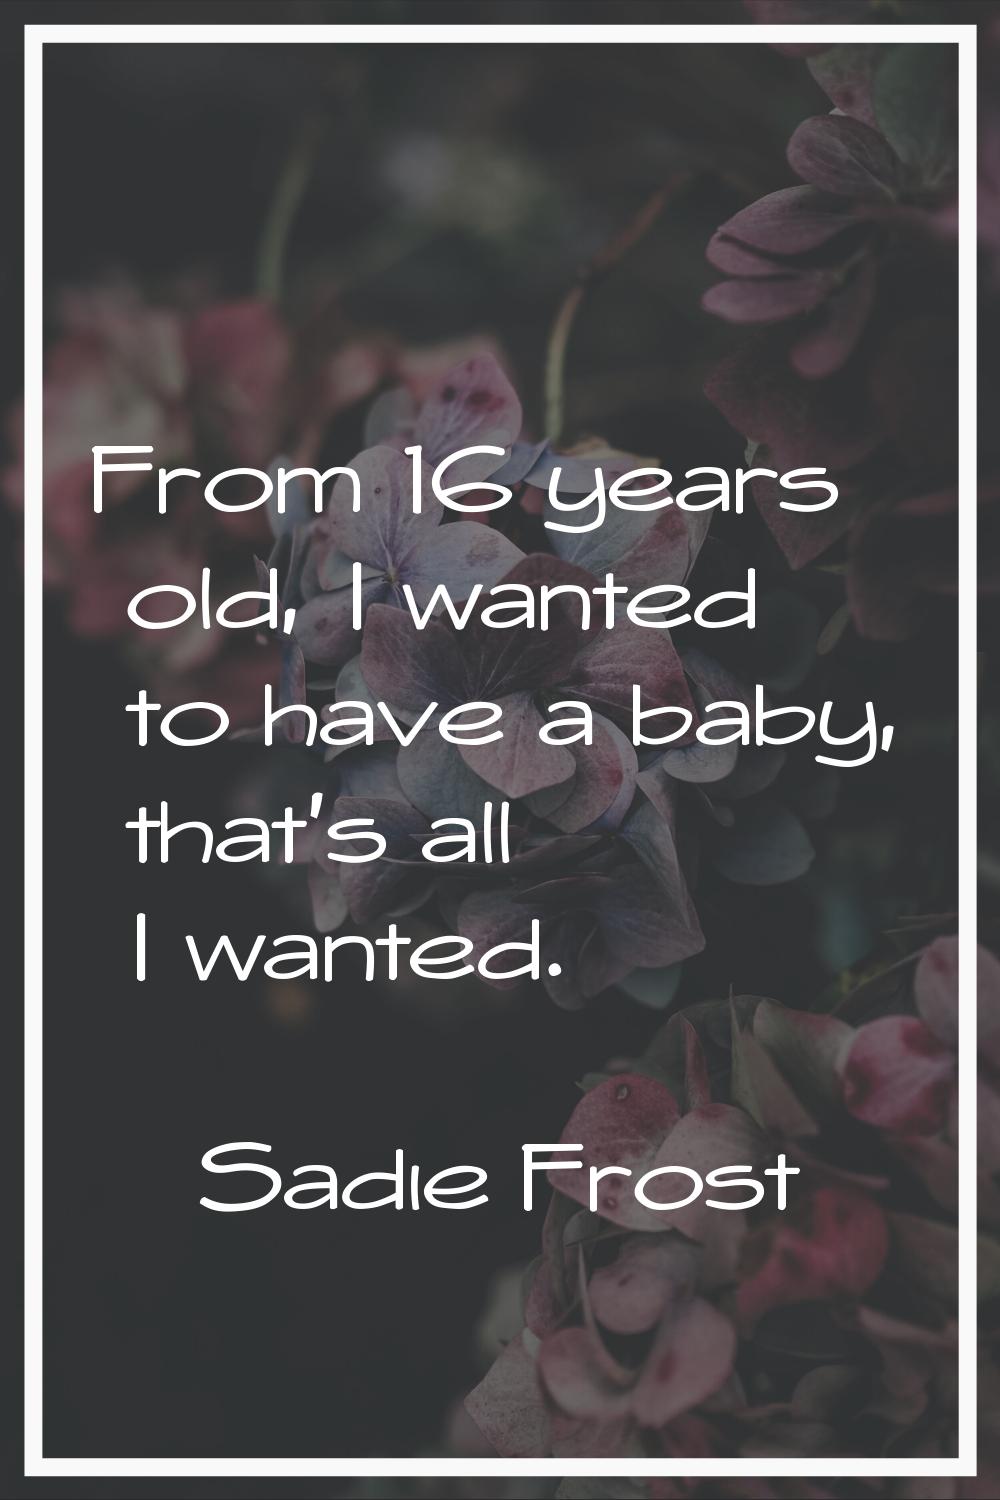 From 16 years old, I wanted to have a baby, that's all I wanted.